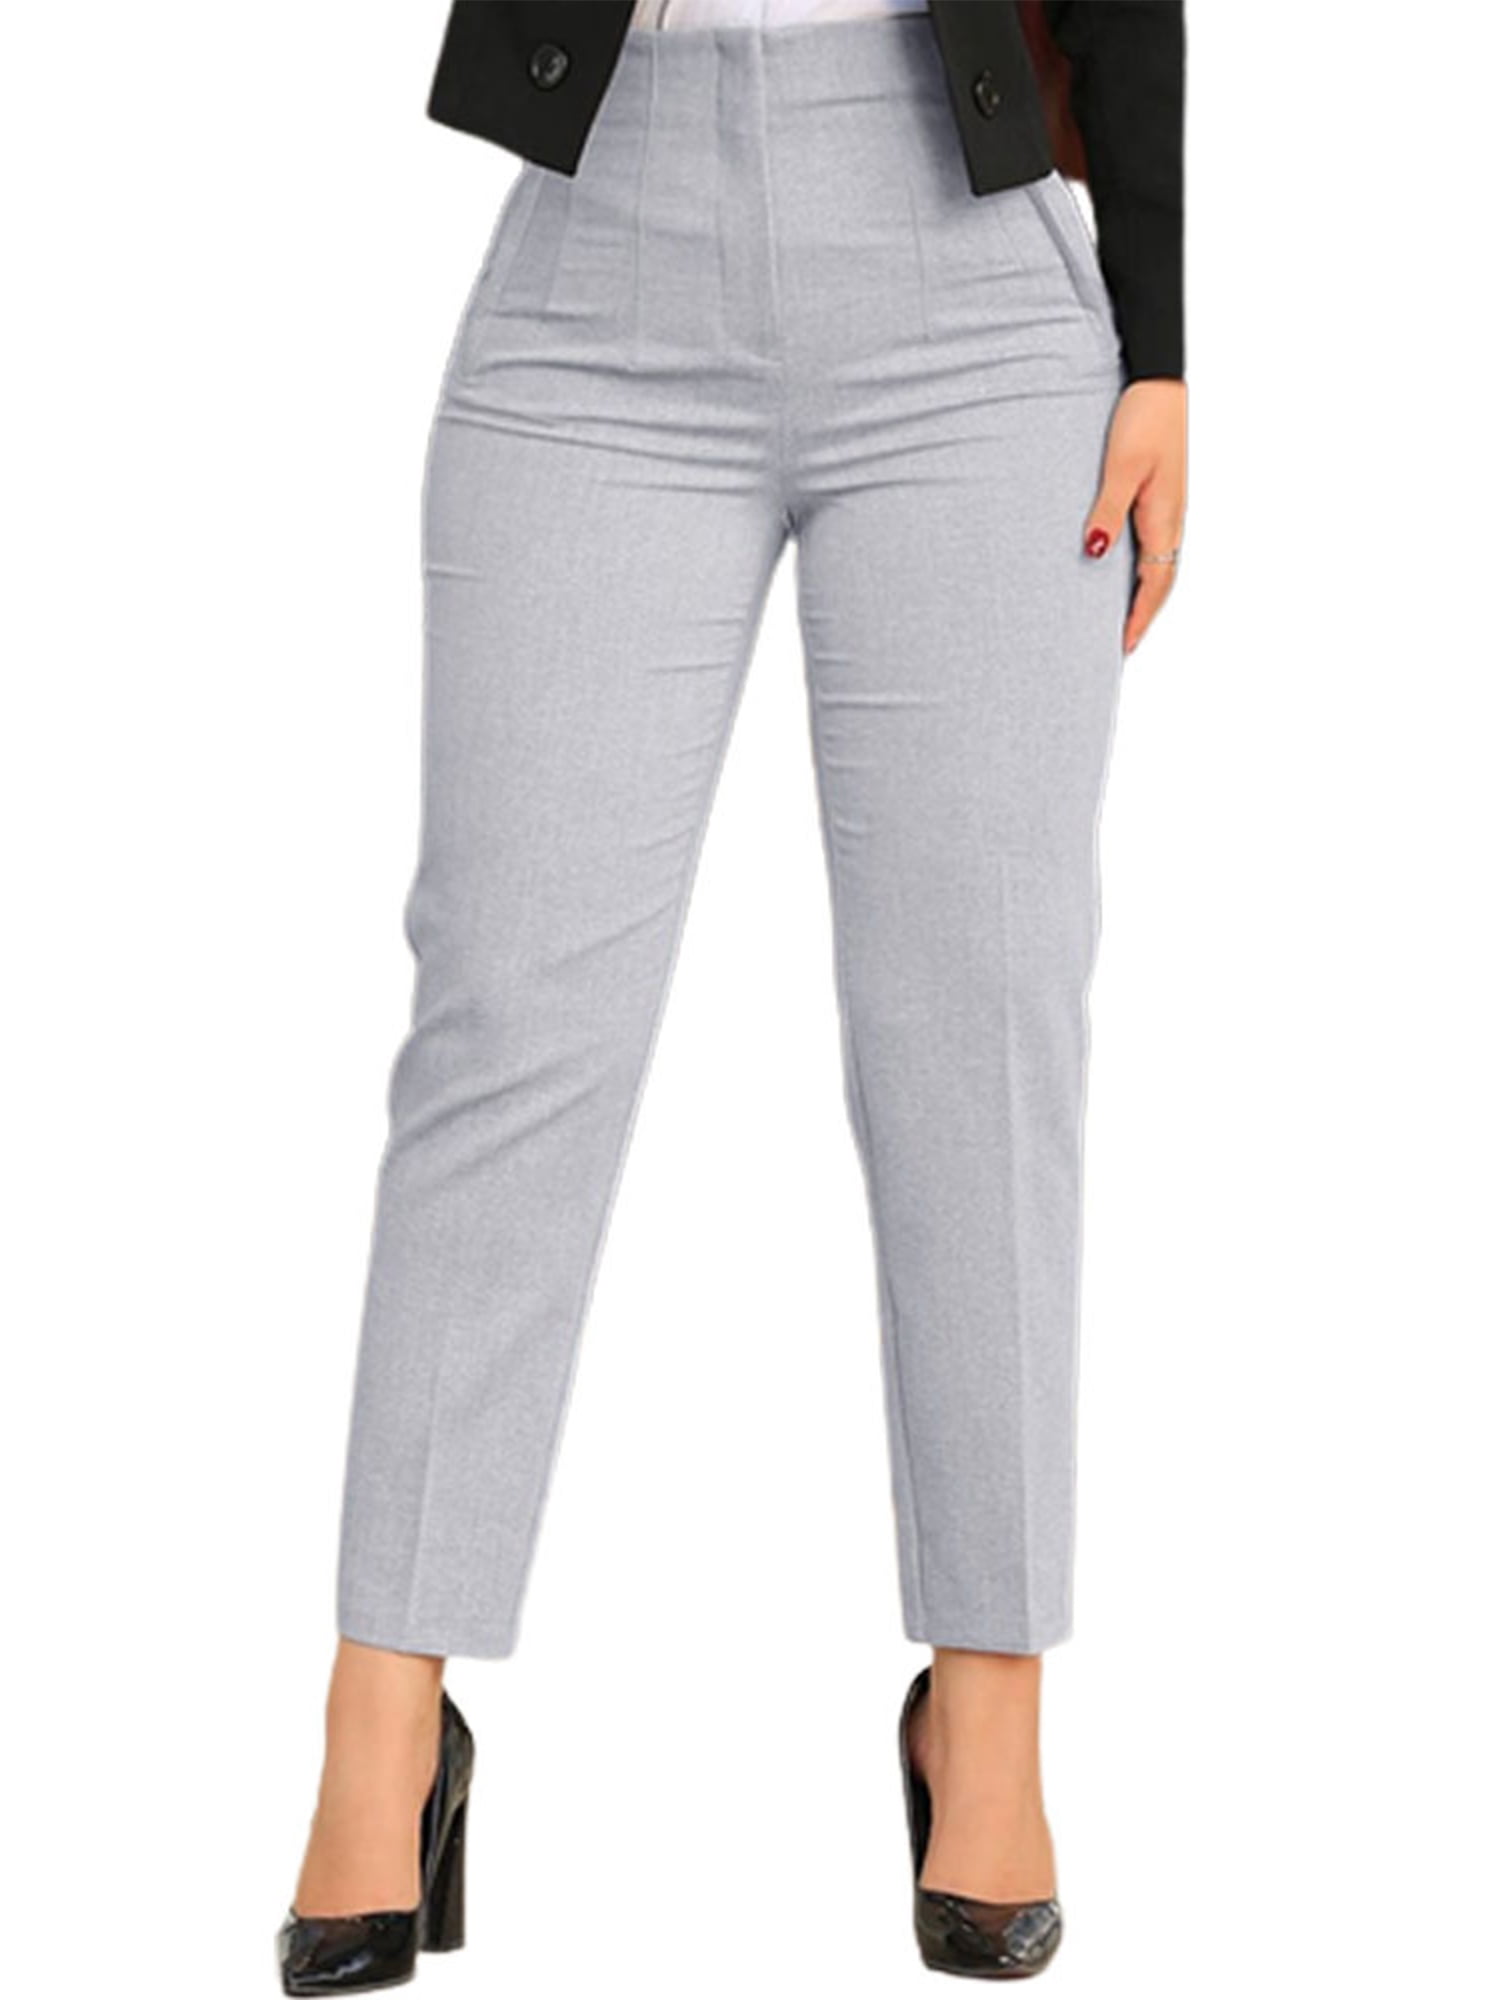  Dress Pants for Womens Work Business Pants Tummy Control Office Straight  Leg Professional Petite 29 Inseam Blue Trousers High Waisted Ladies Slacks  : Clothing, Shoes & Jewelry